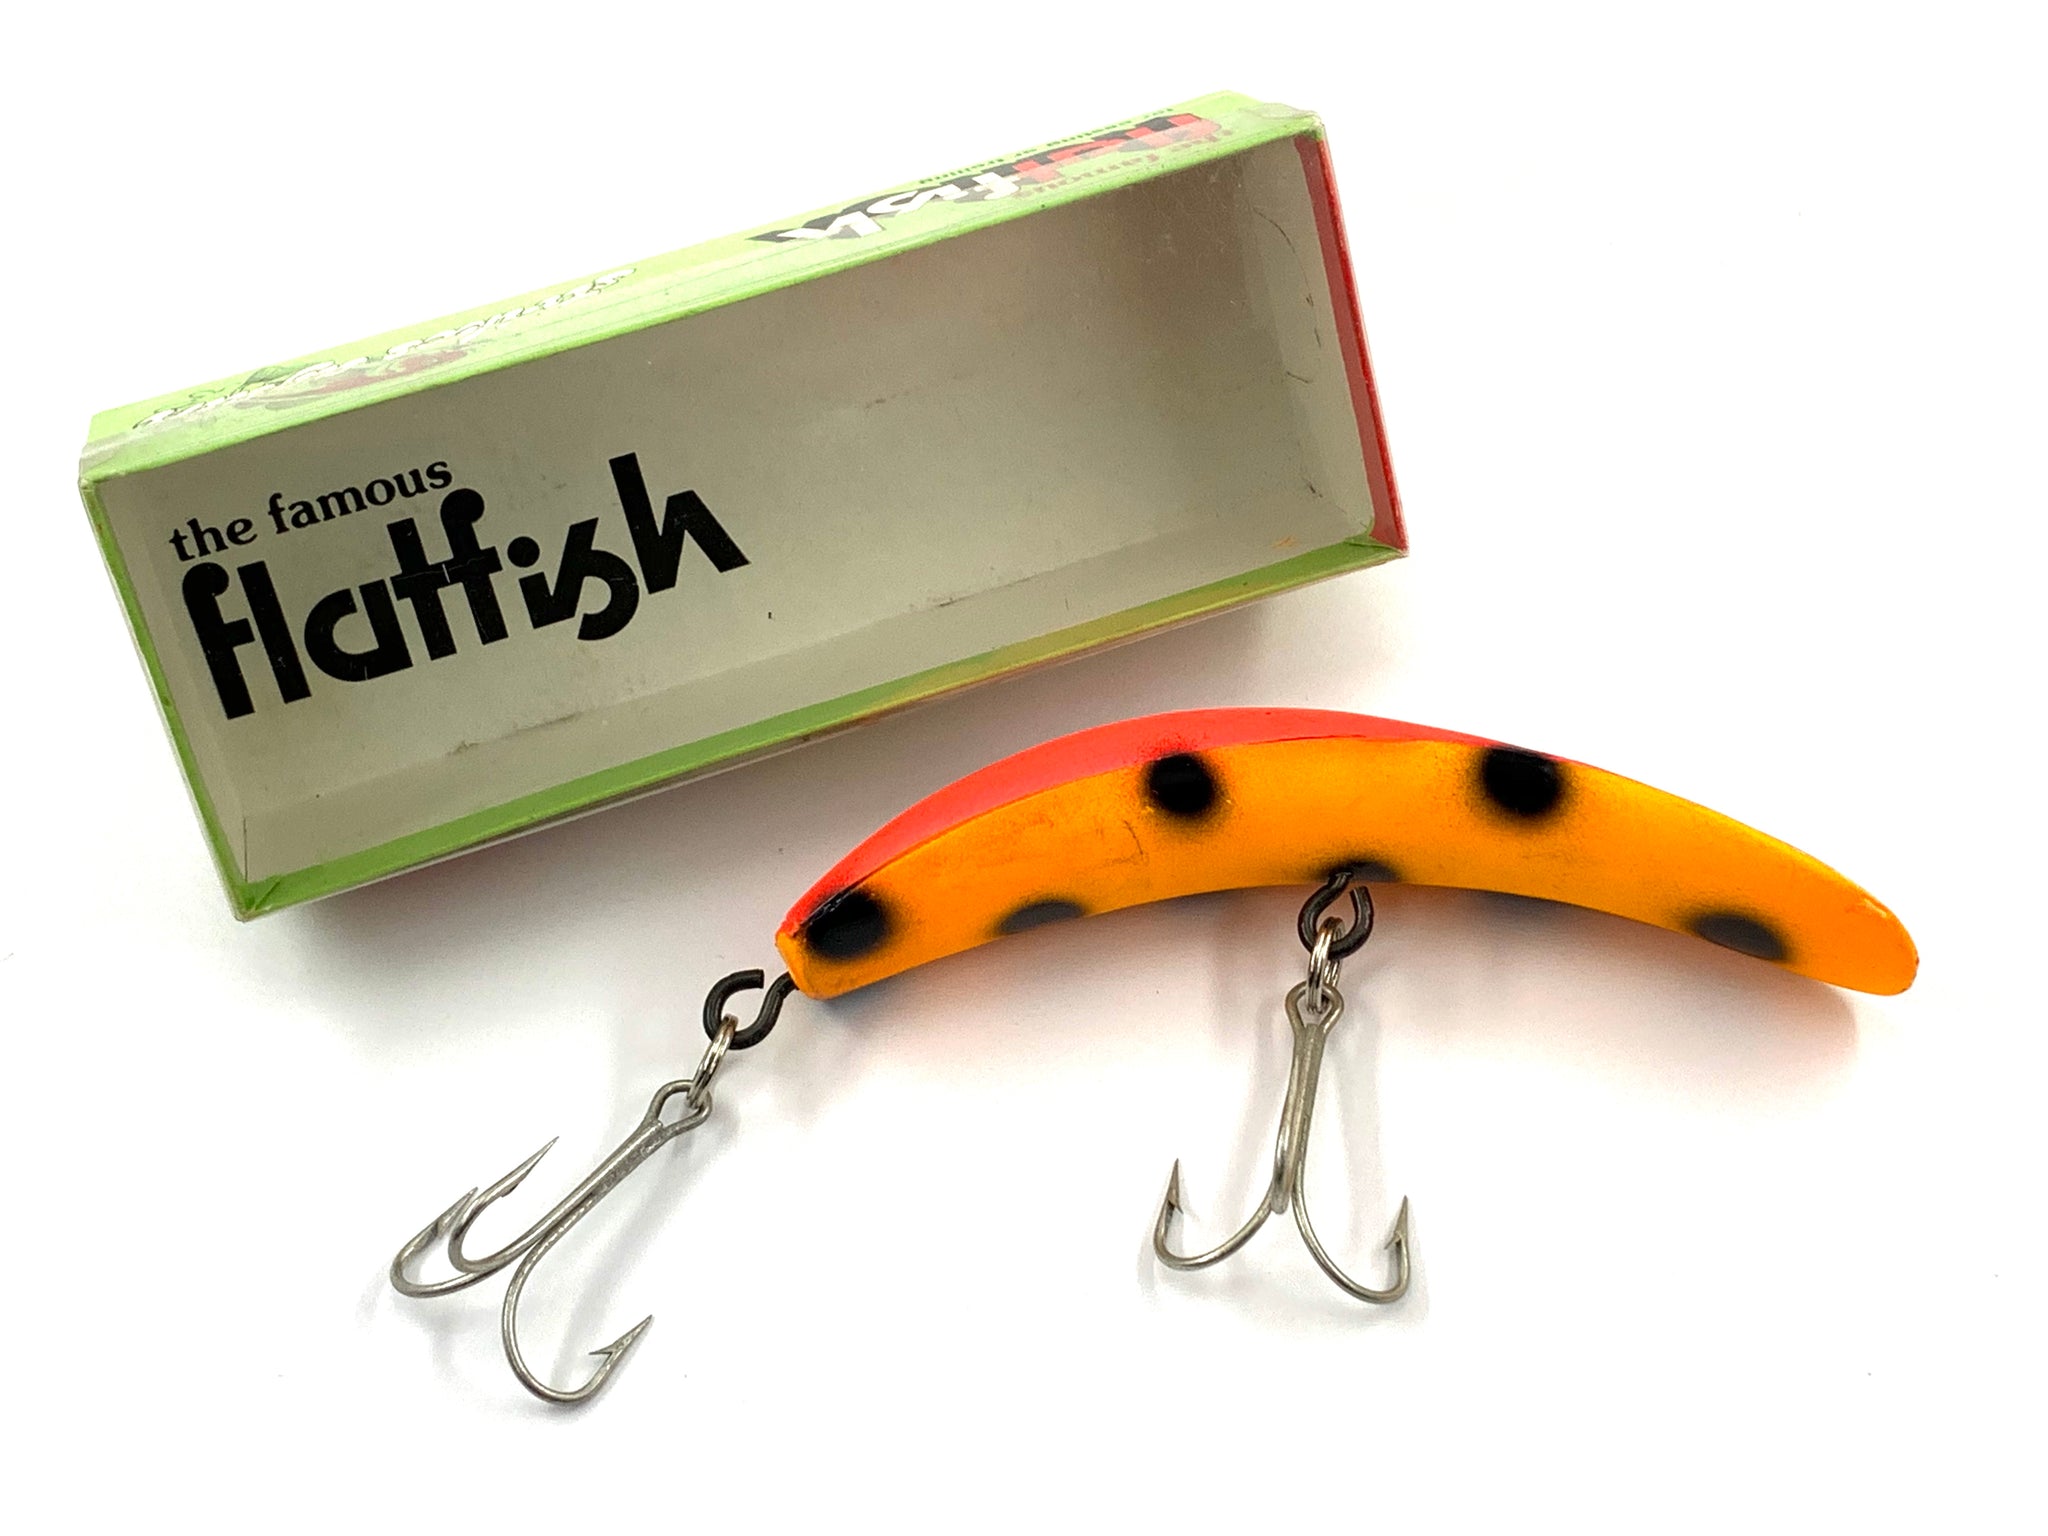 HELIN TACKLE COMPANY FAMOUS FLATFISH Fishing Lure • # T60 CH – Toad Tackle